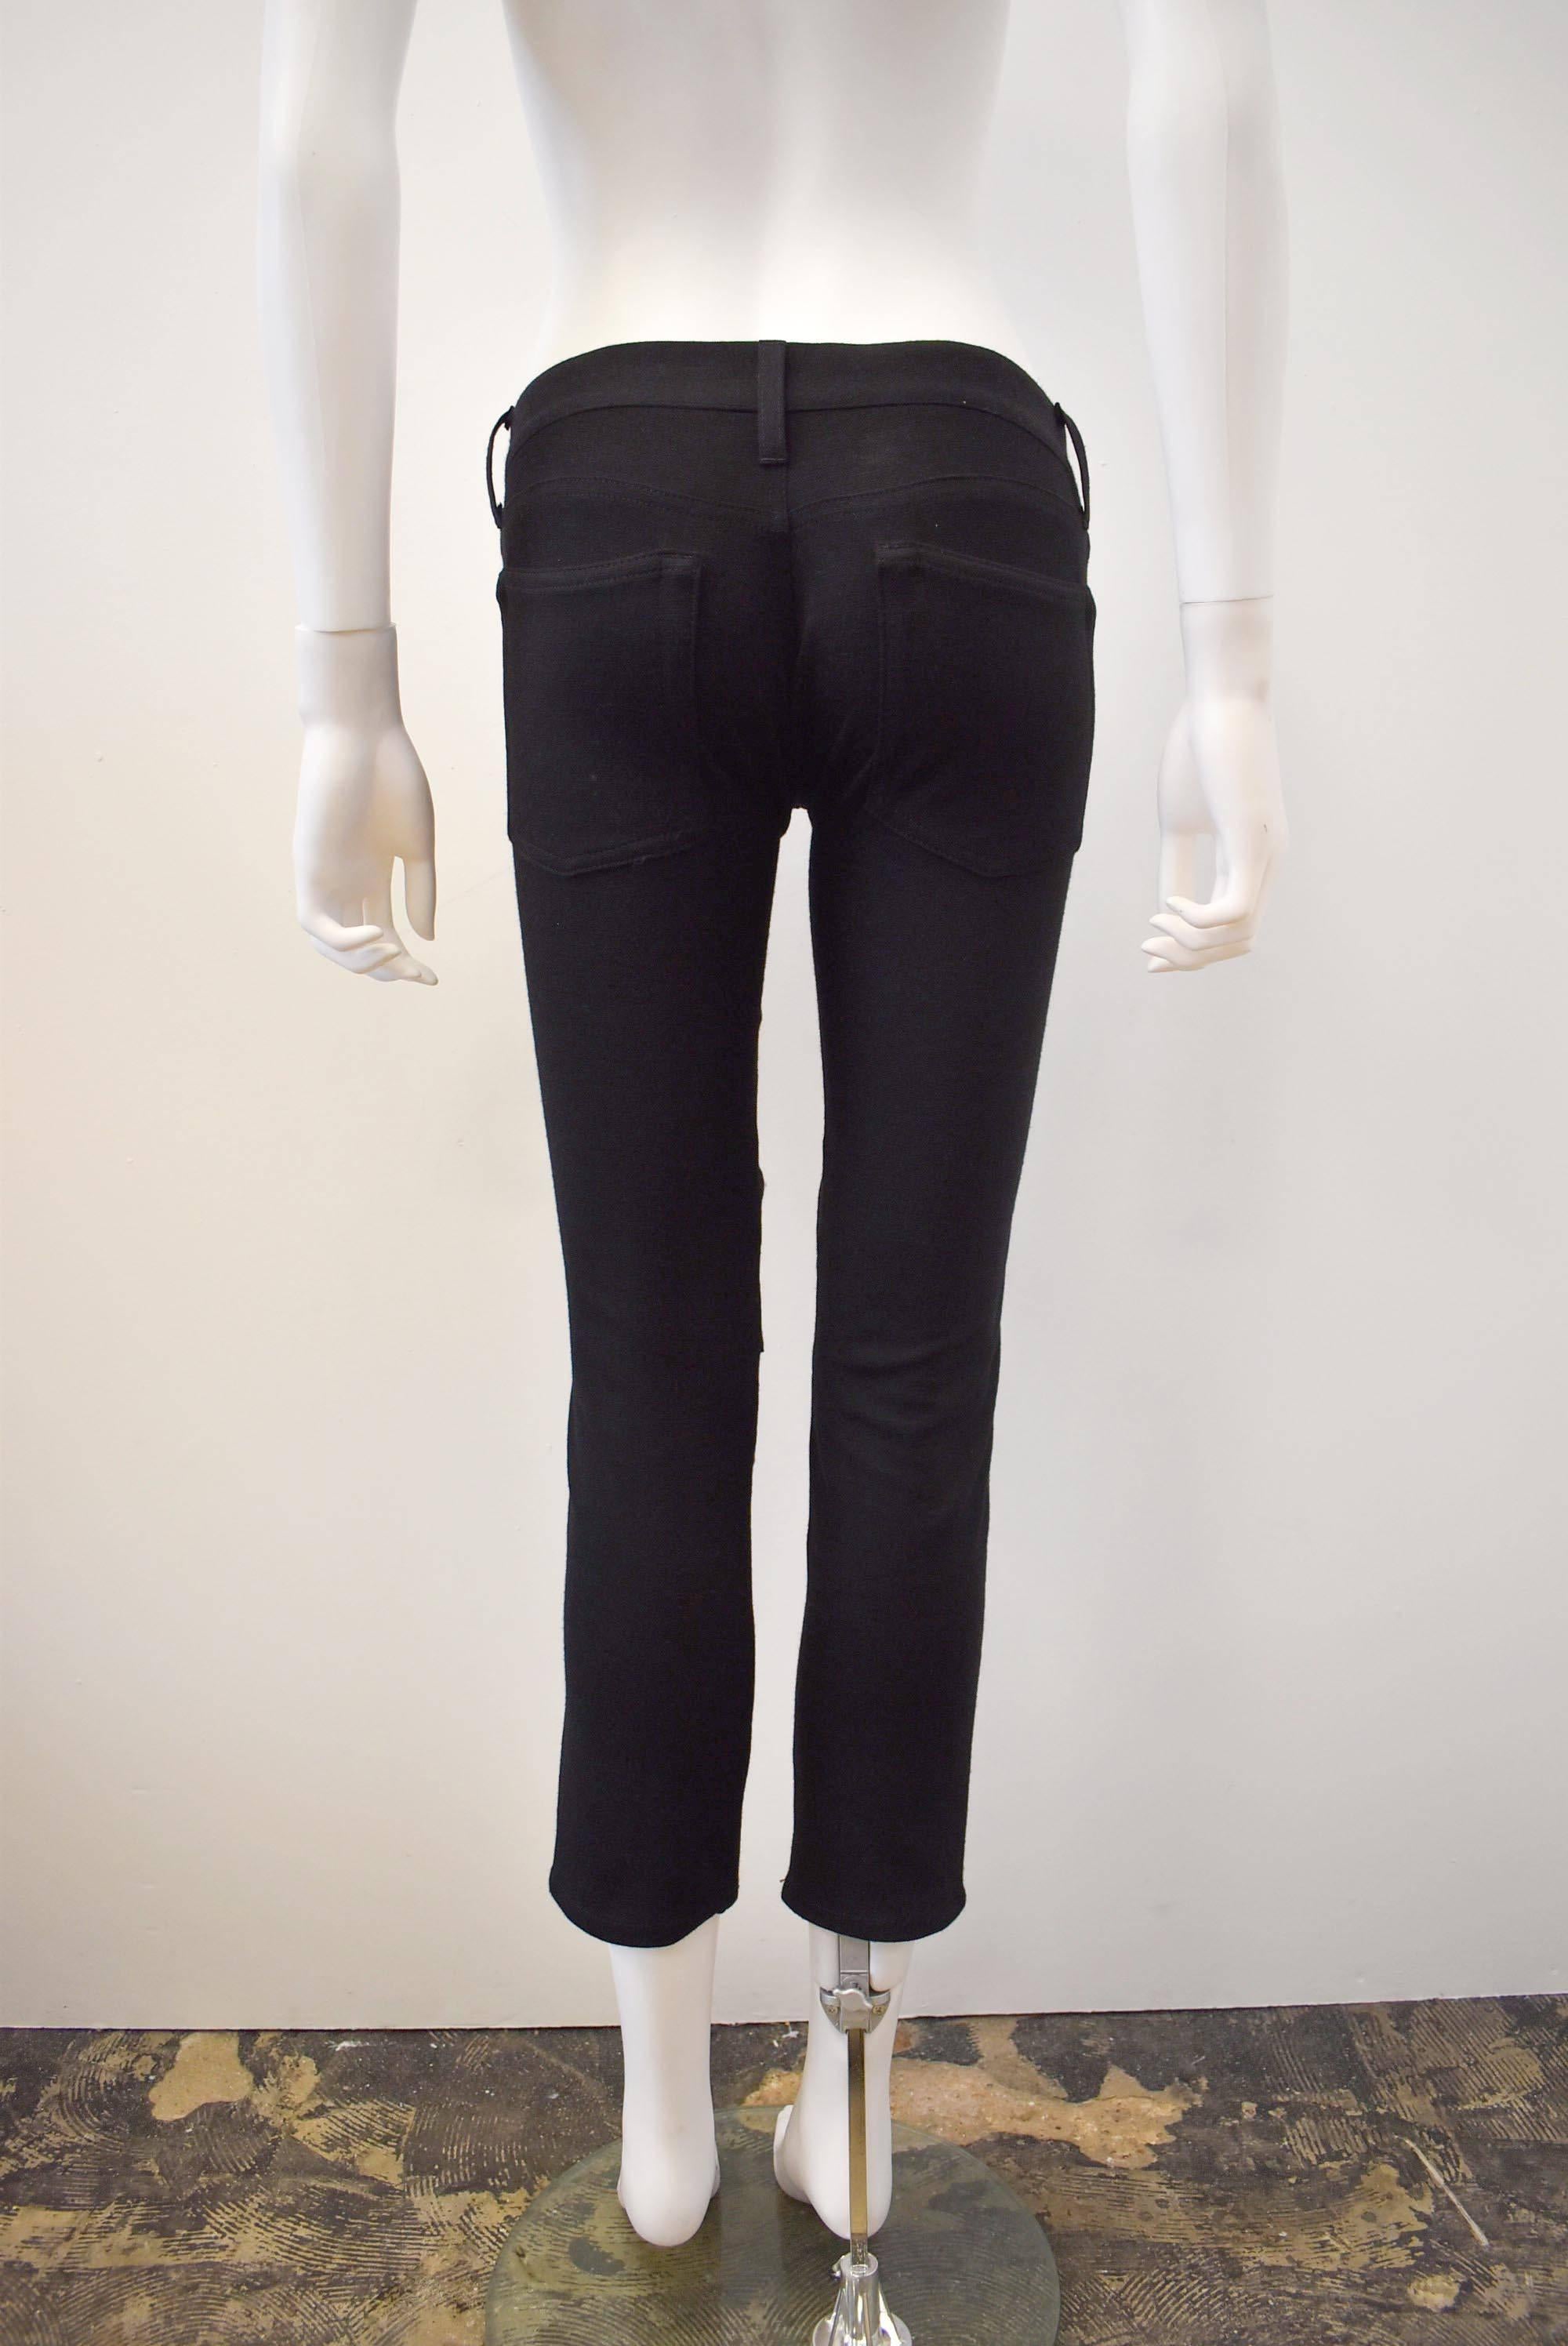 Women's or Men's Junya Watanabe CDG AW15 Punk black studded skinny jeans with slashed knee